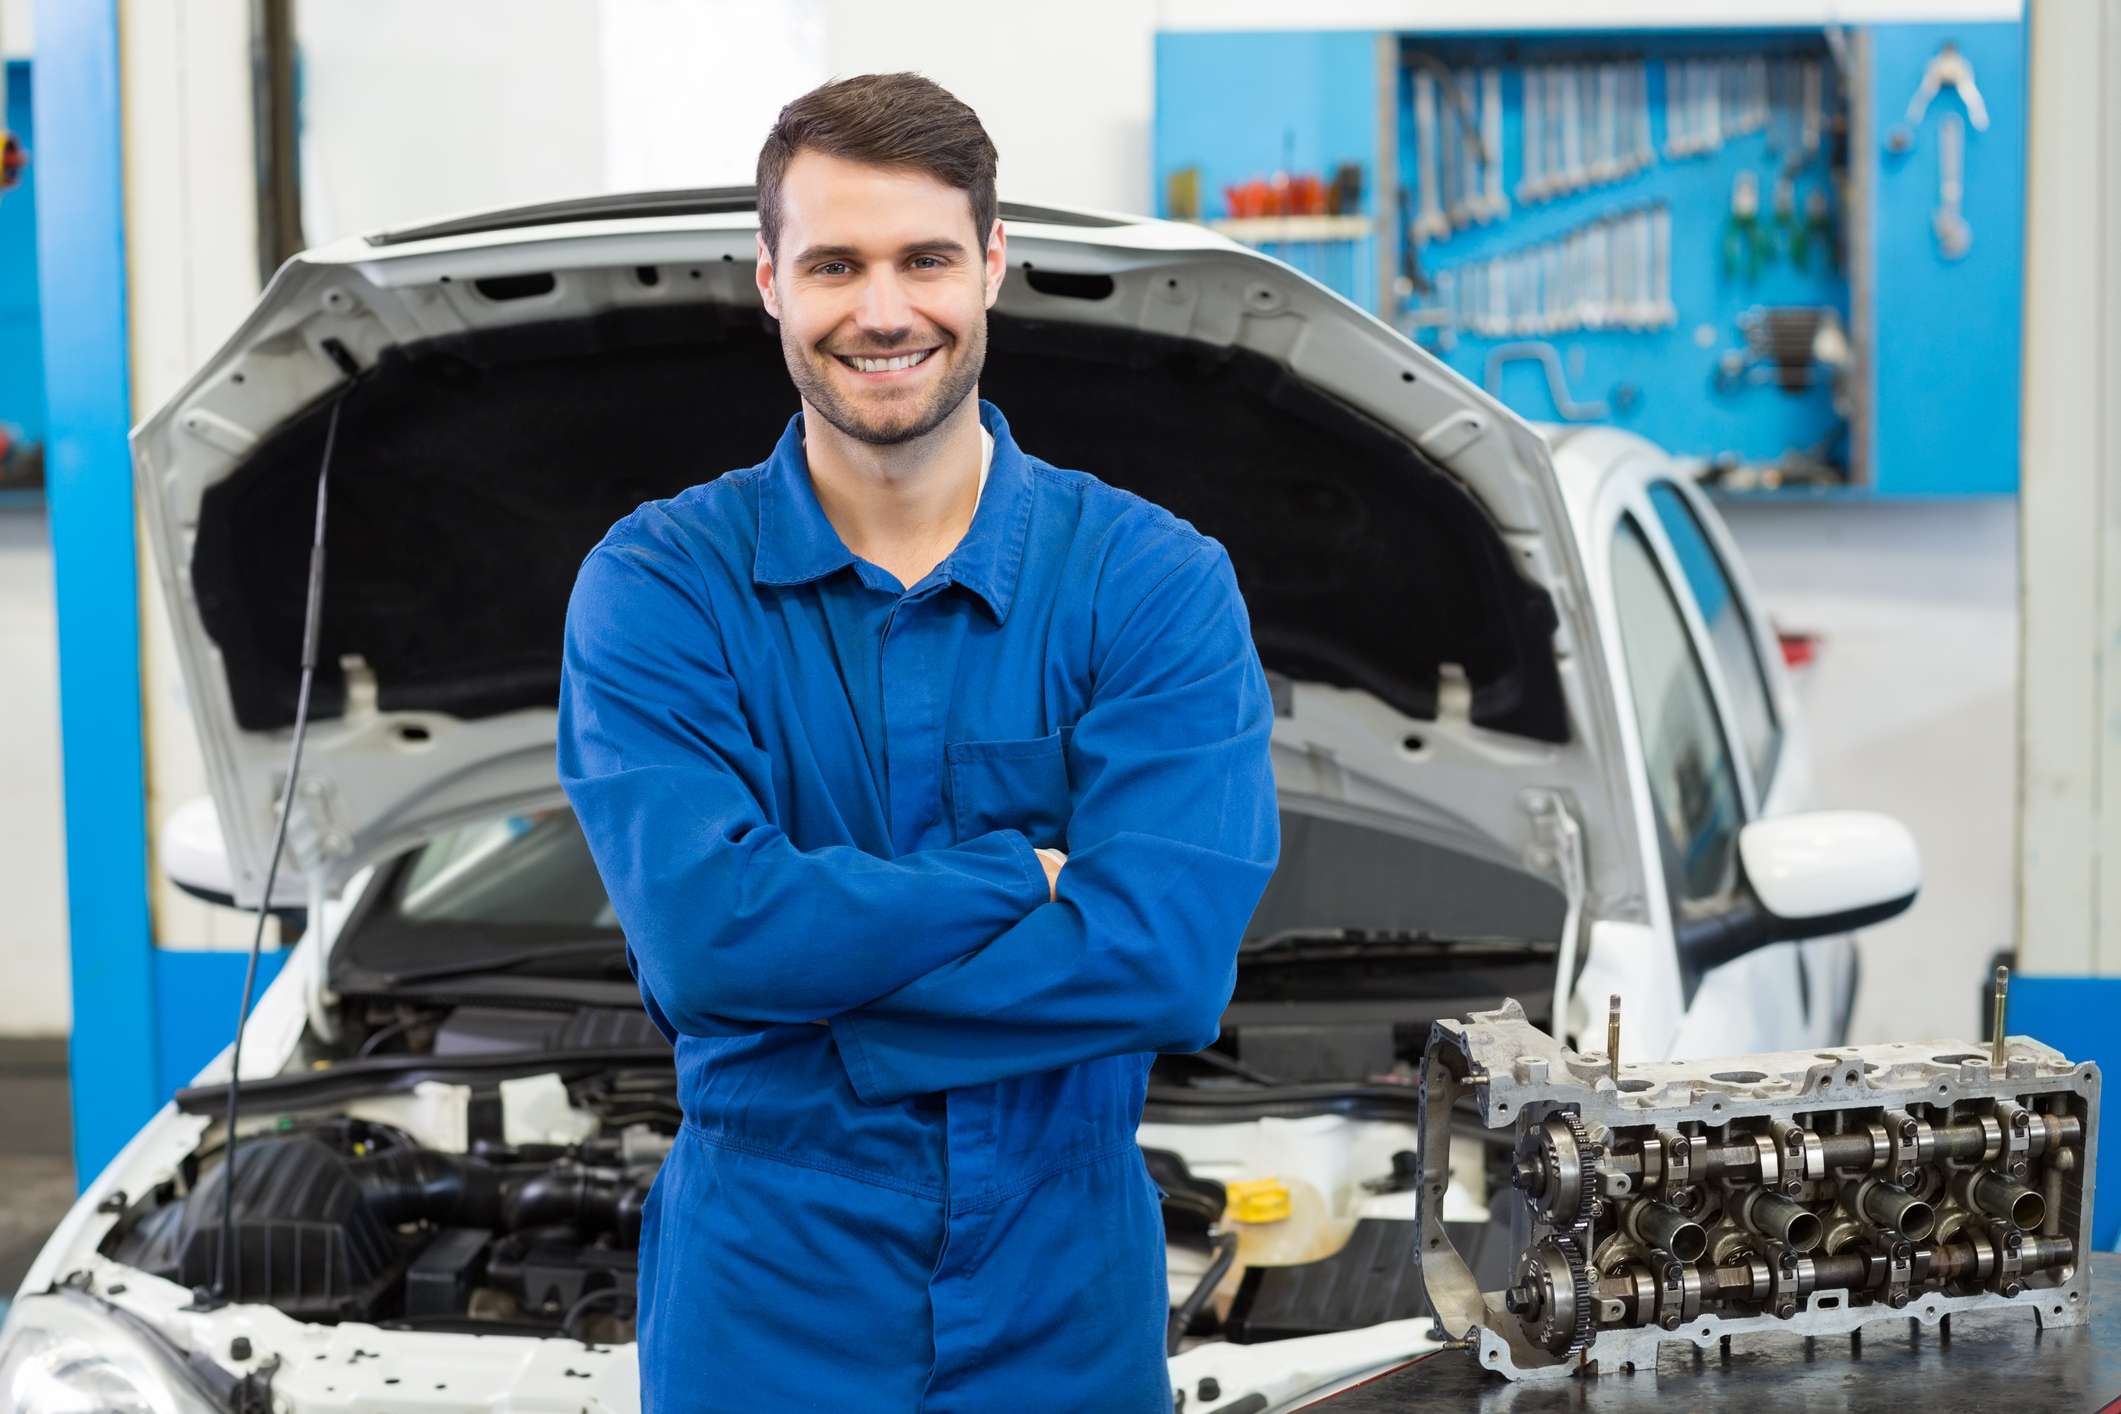 mechanic guy smiling with a car behind